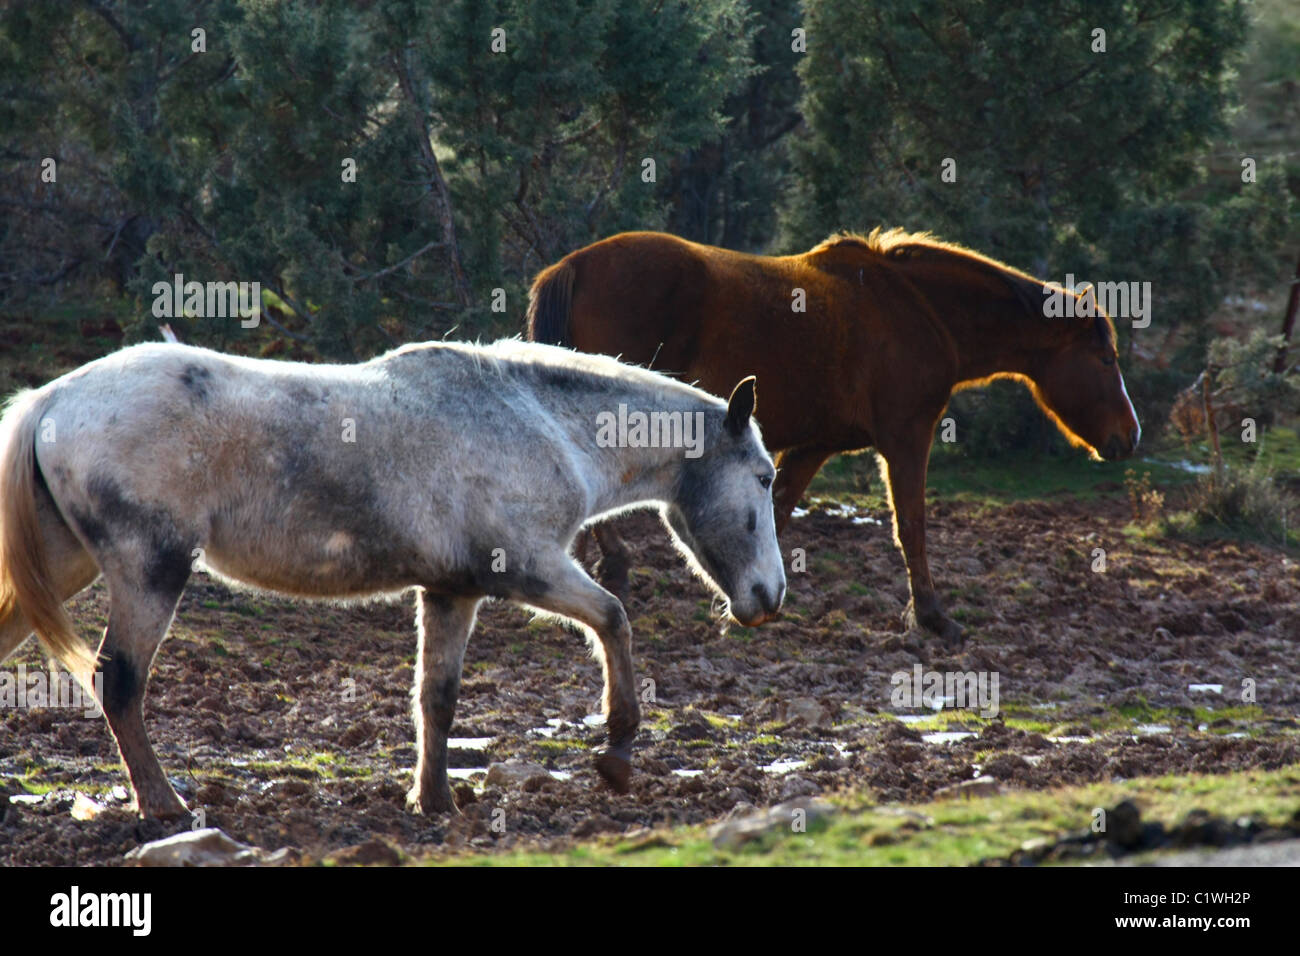 Two horses, one an old gray/grey mare and one brown, walking in muddy field. Stock Photo